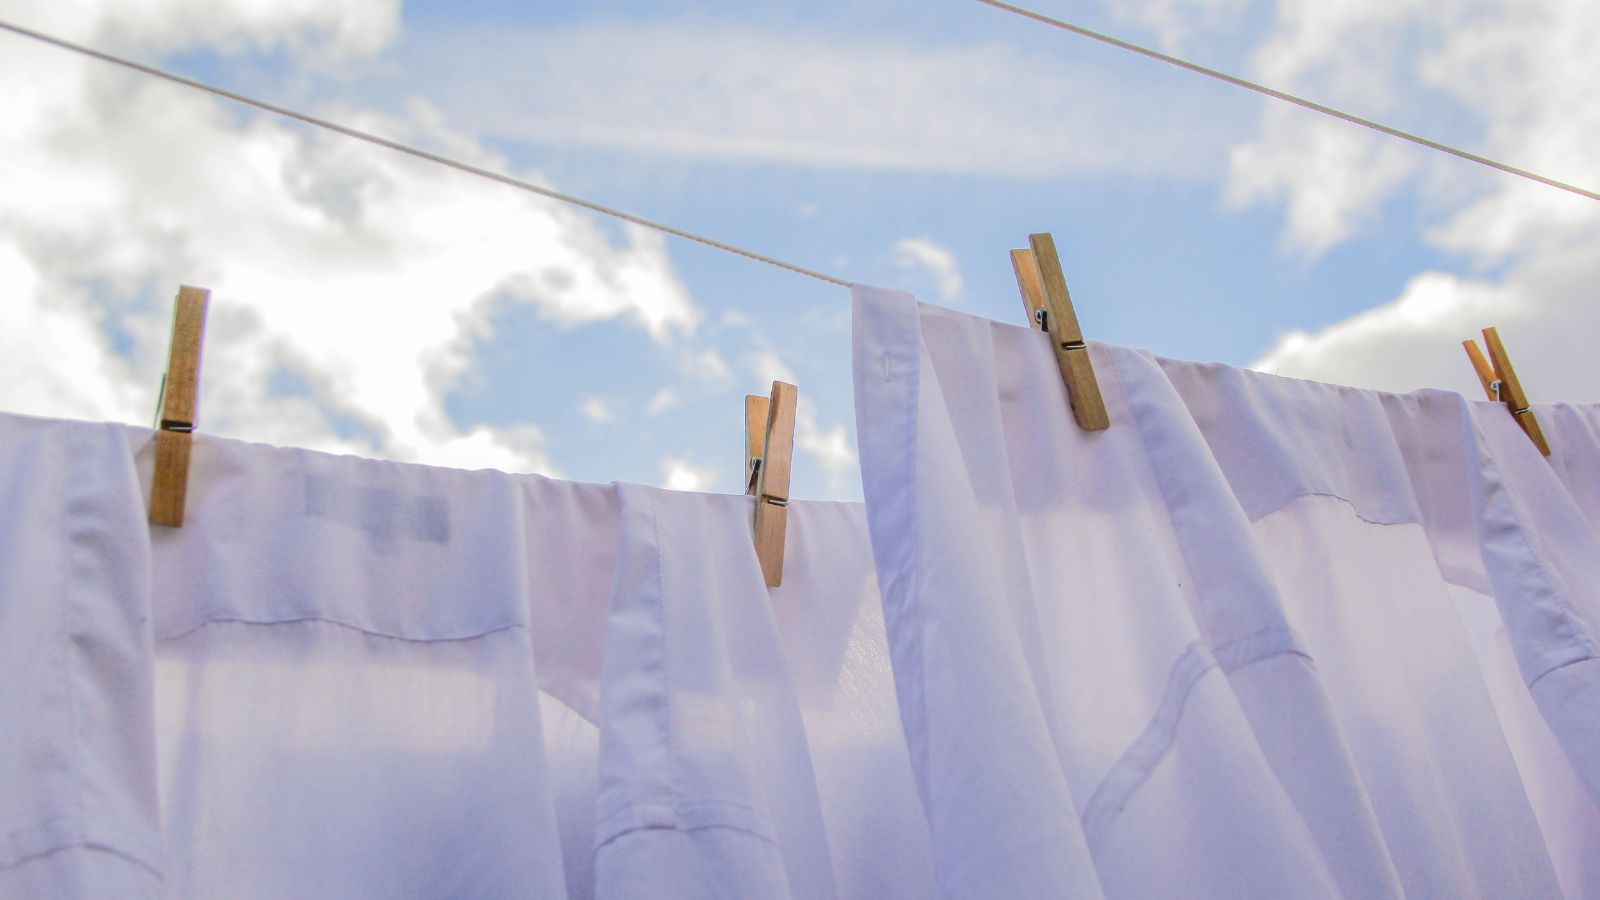 Why Americans should start line-drying laundry